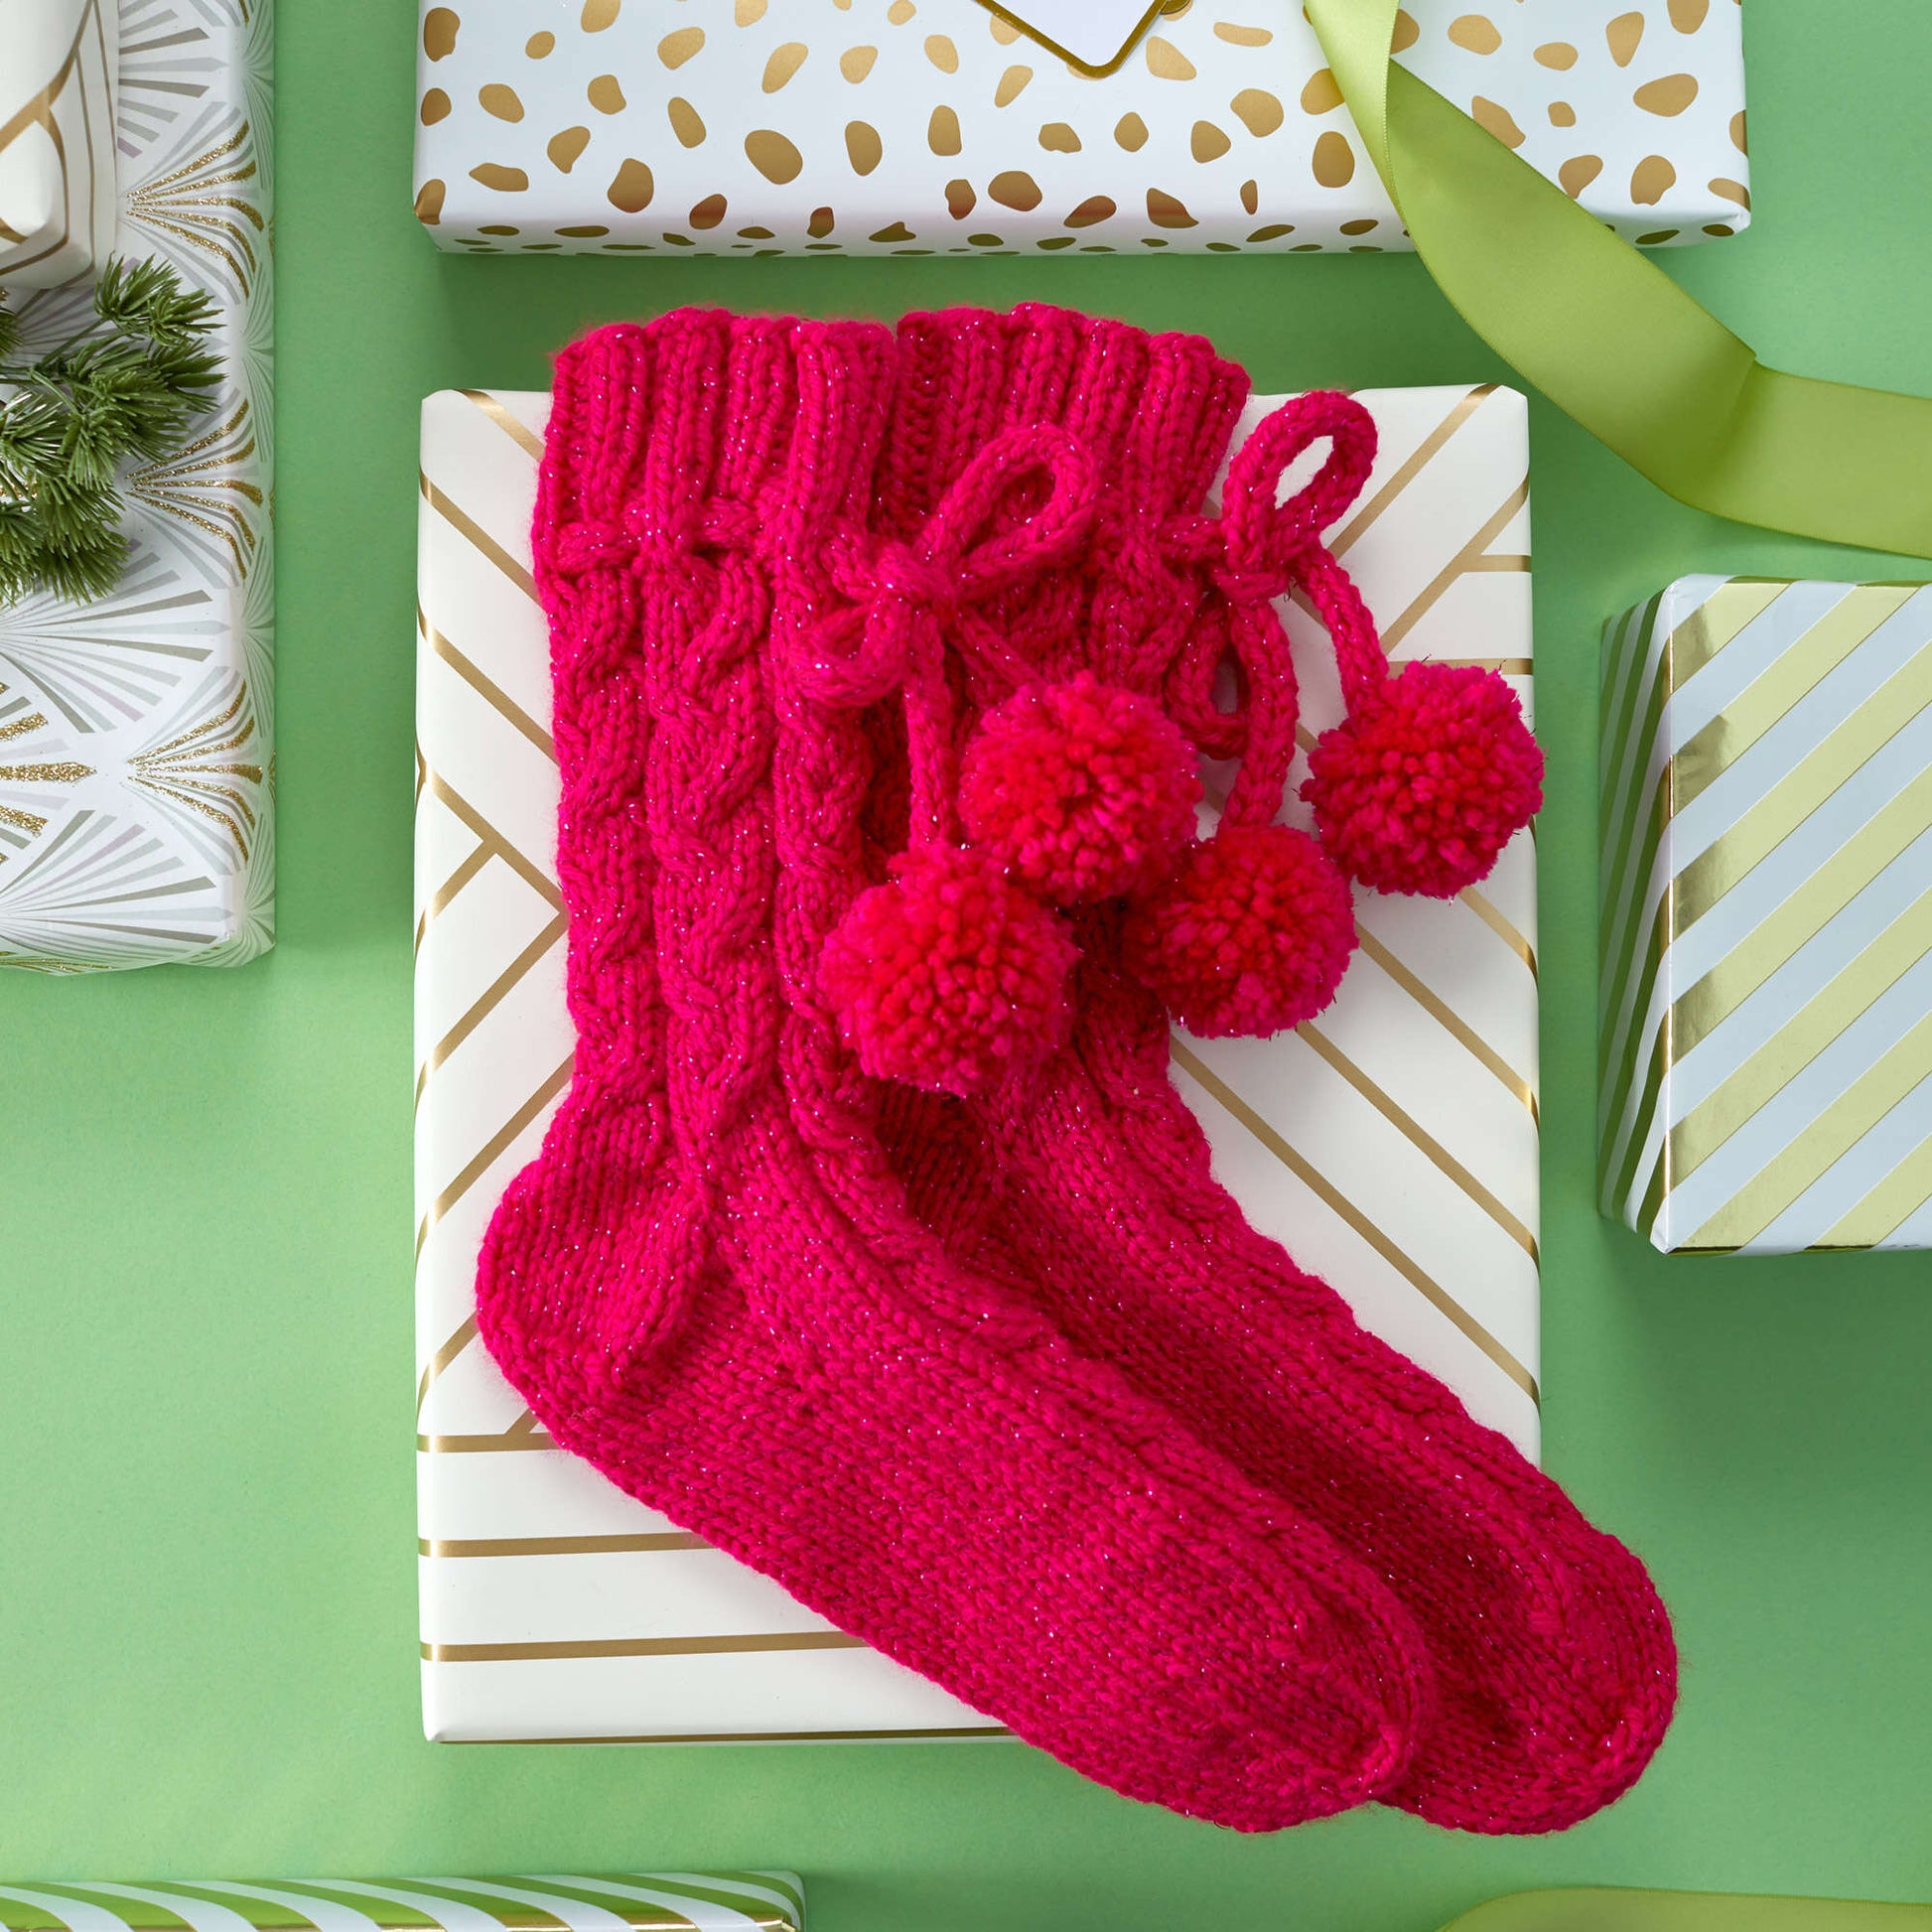 Red Heart Knit Cable Stocking